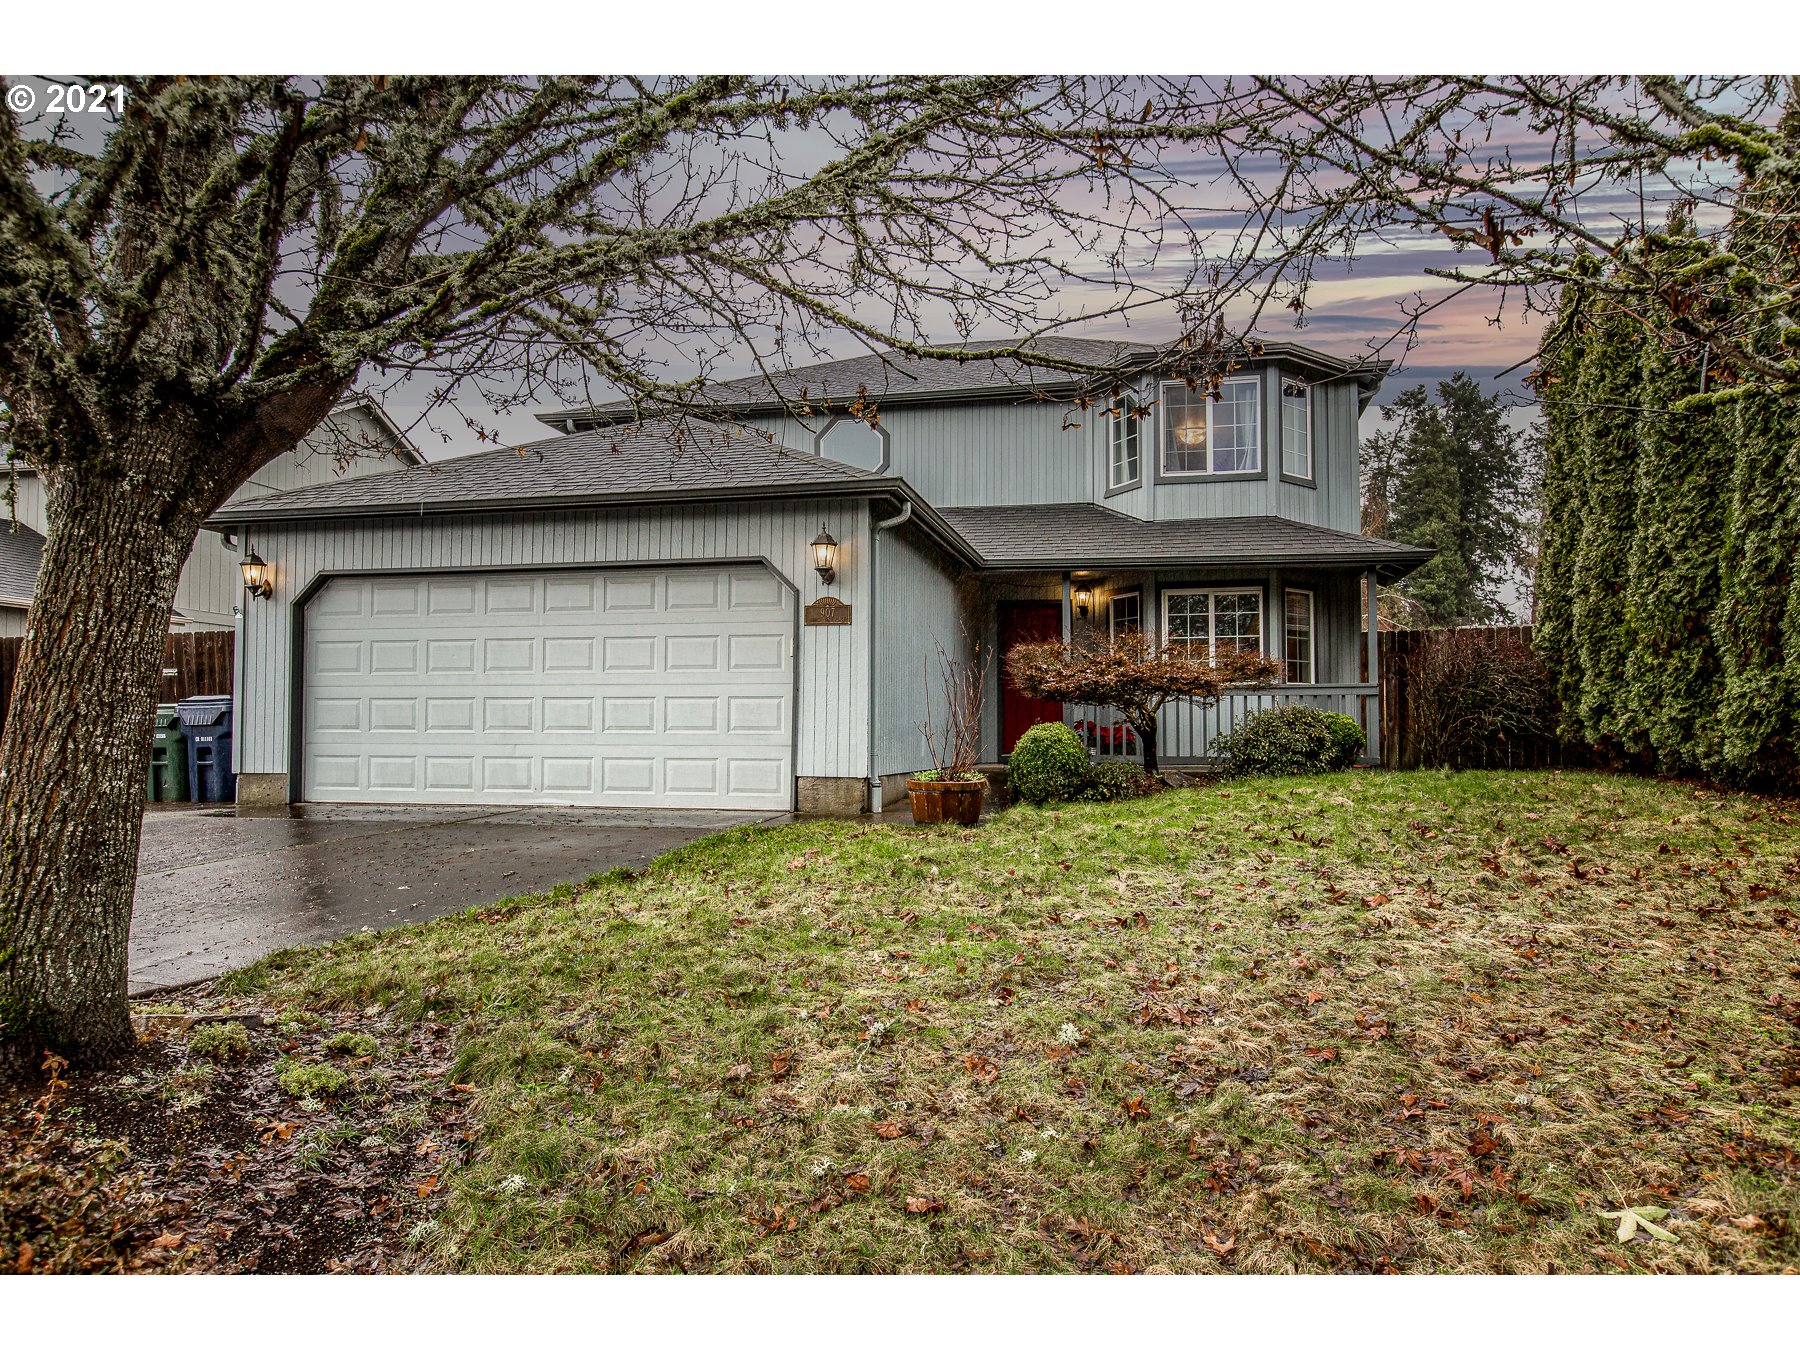 907 S 32ND PL (1 of 28)